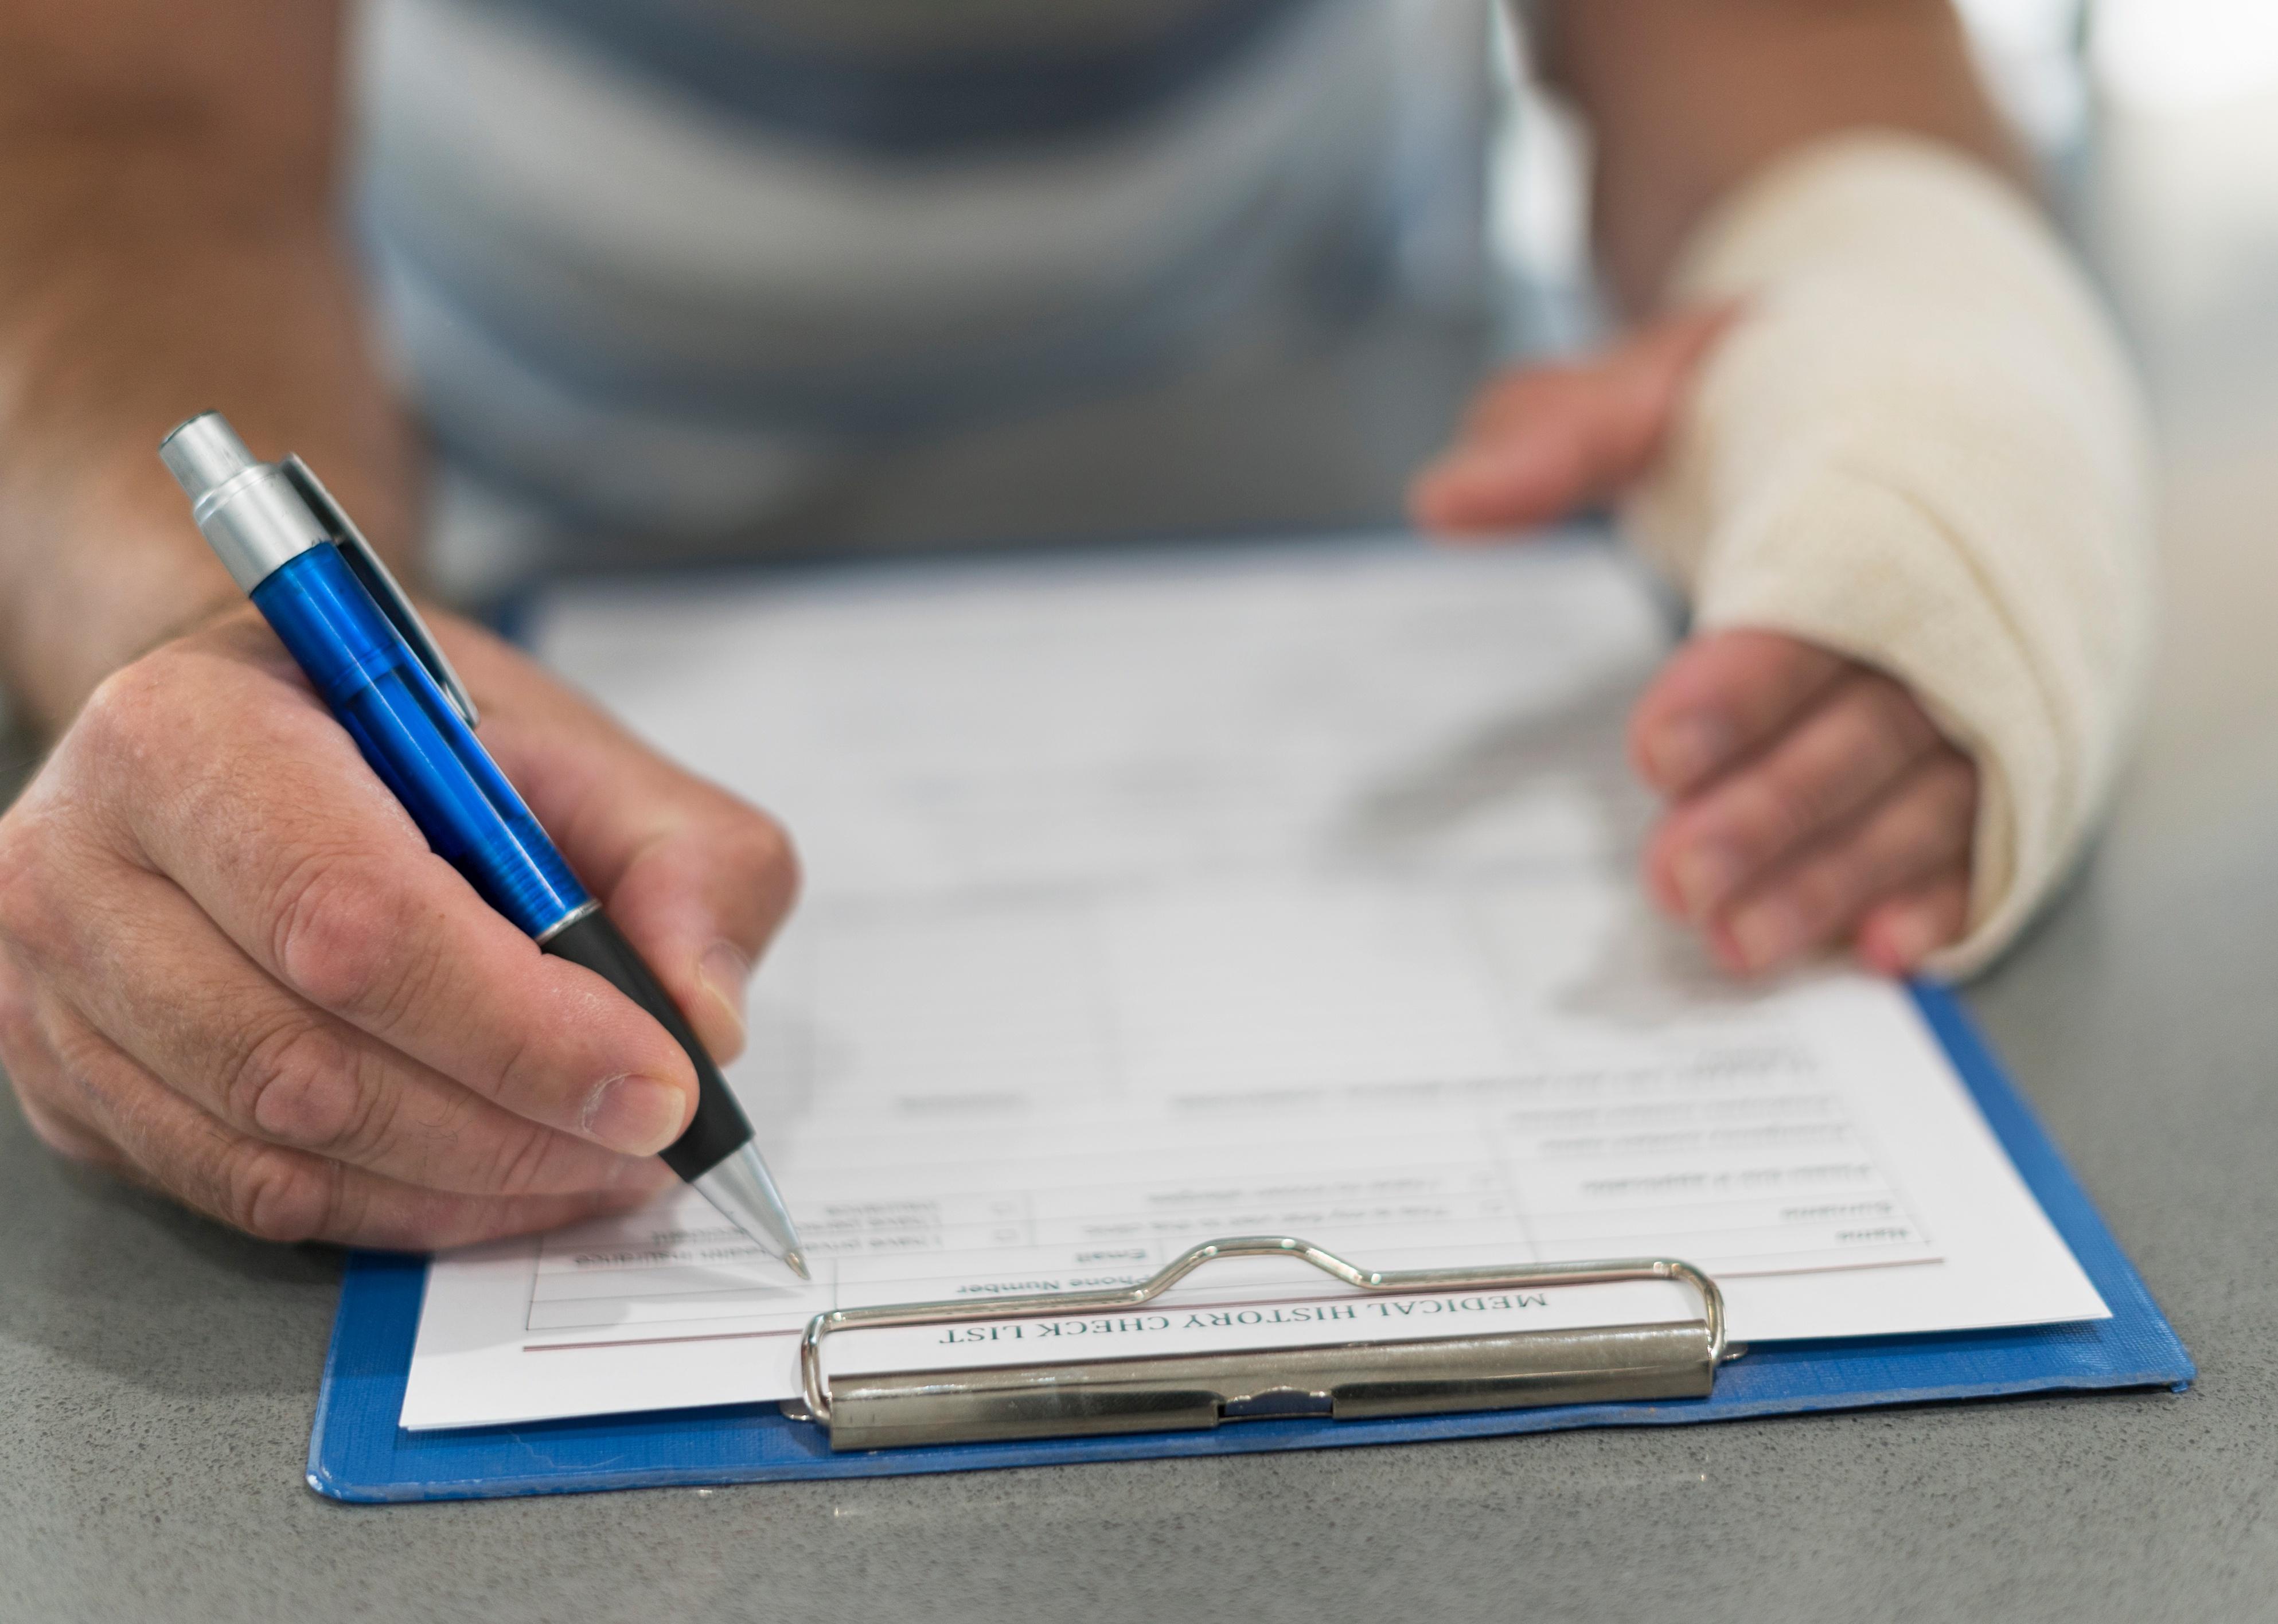 A person filling in medical forms after an injury.